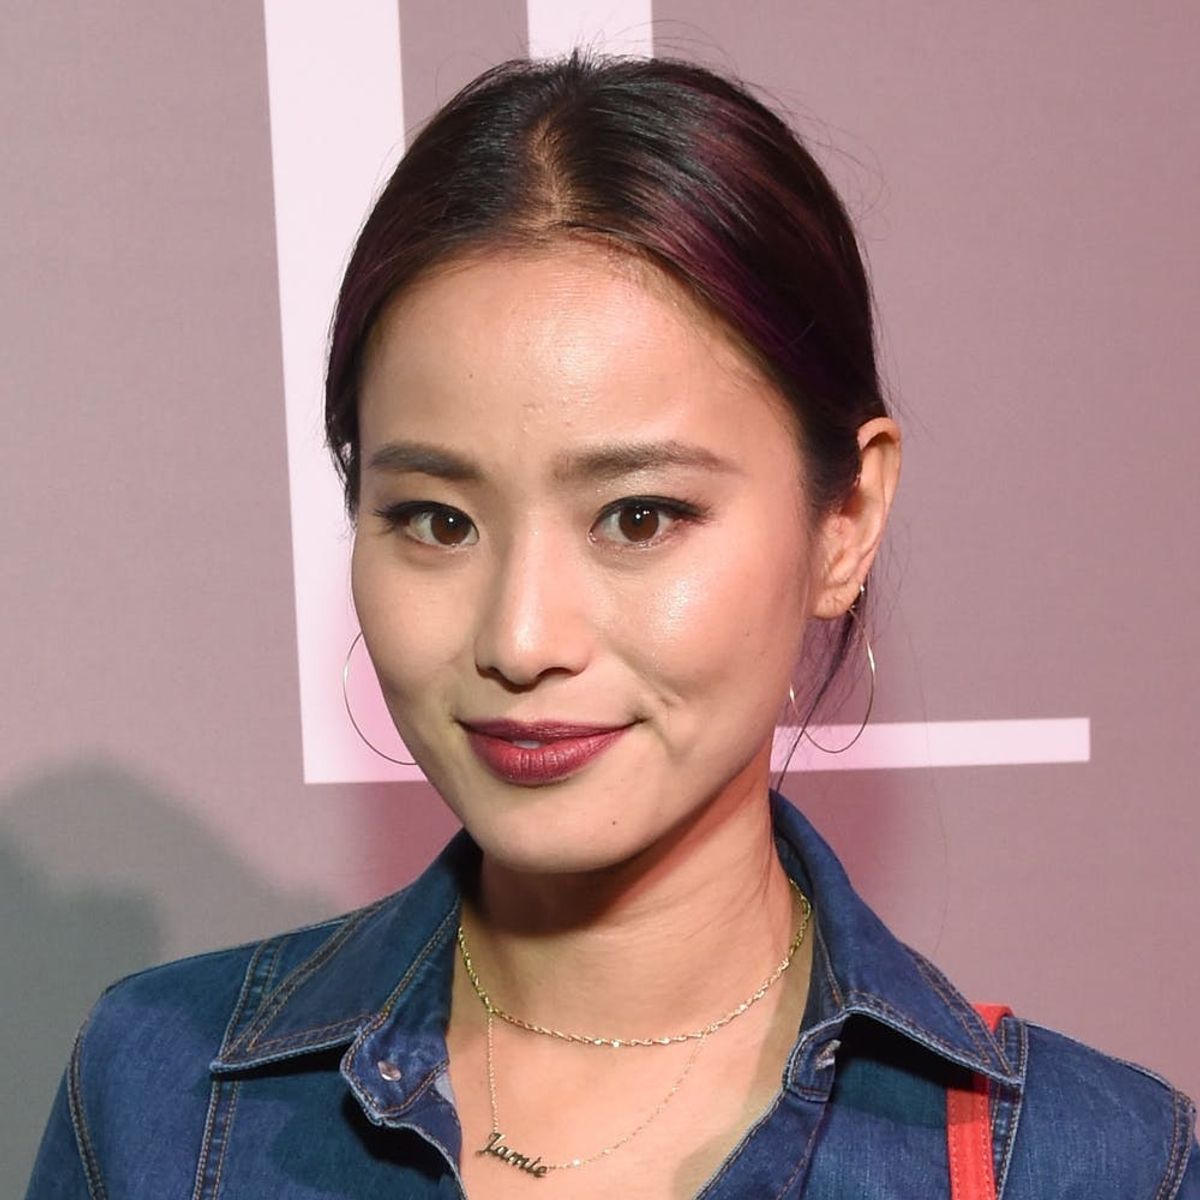 This Handcrafted Jewelry Brand Is Where Jamie Chung Got Her Coachella Bling